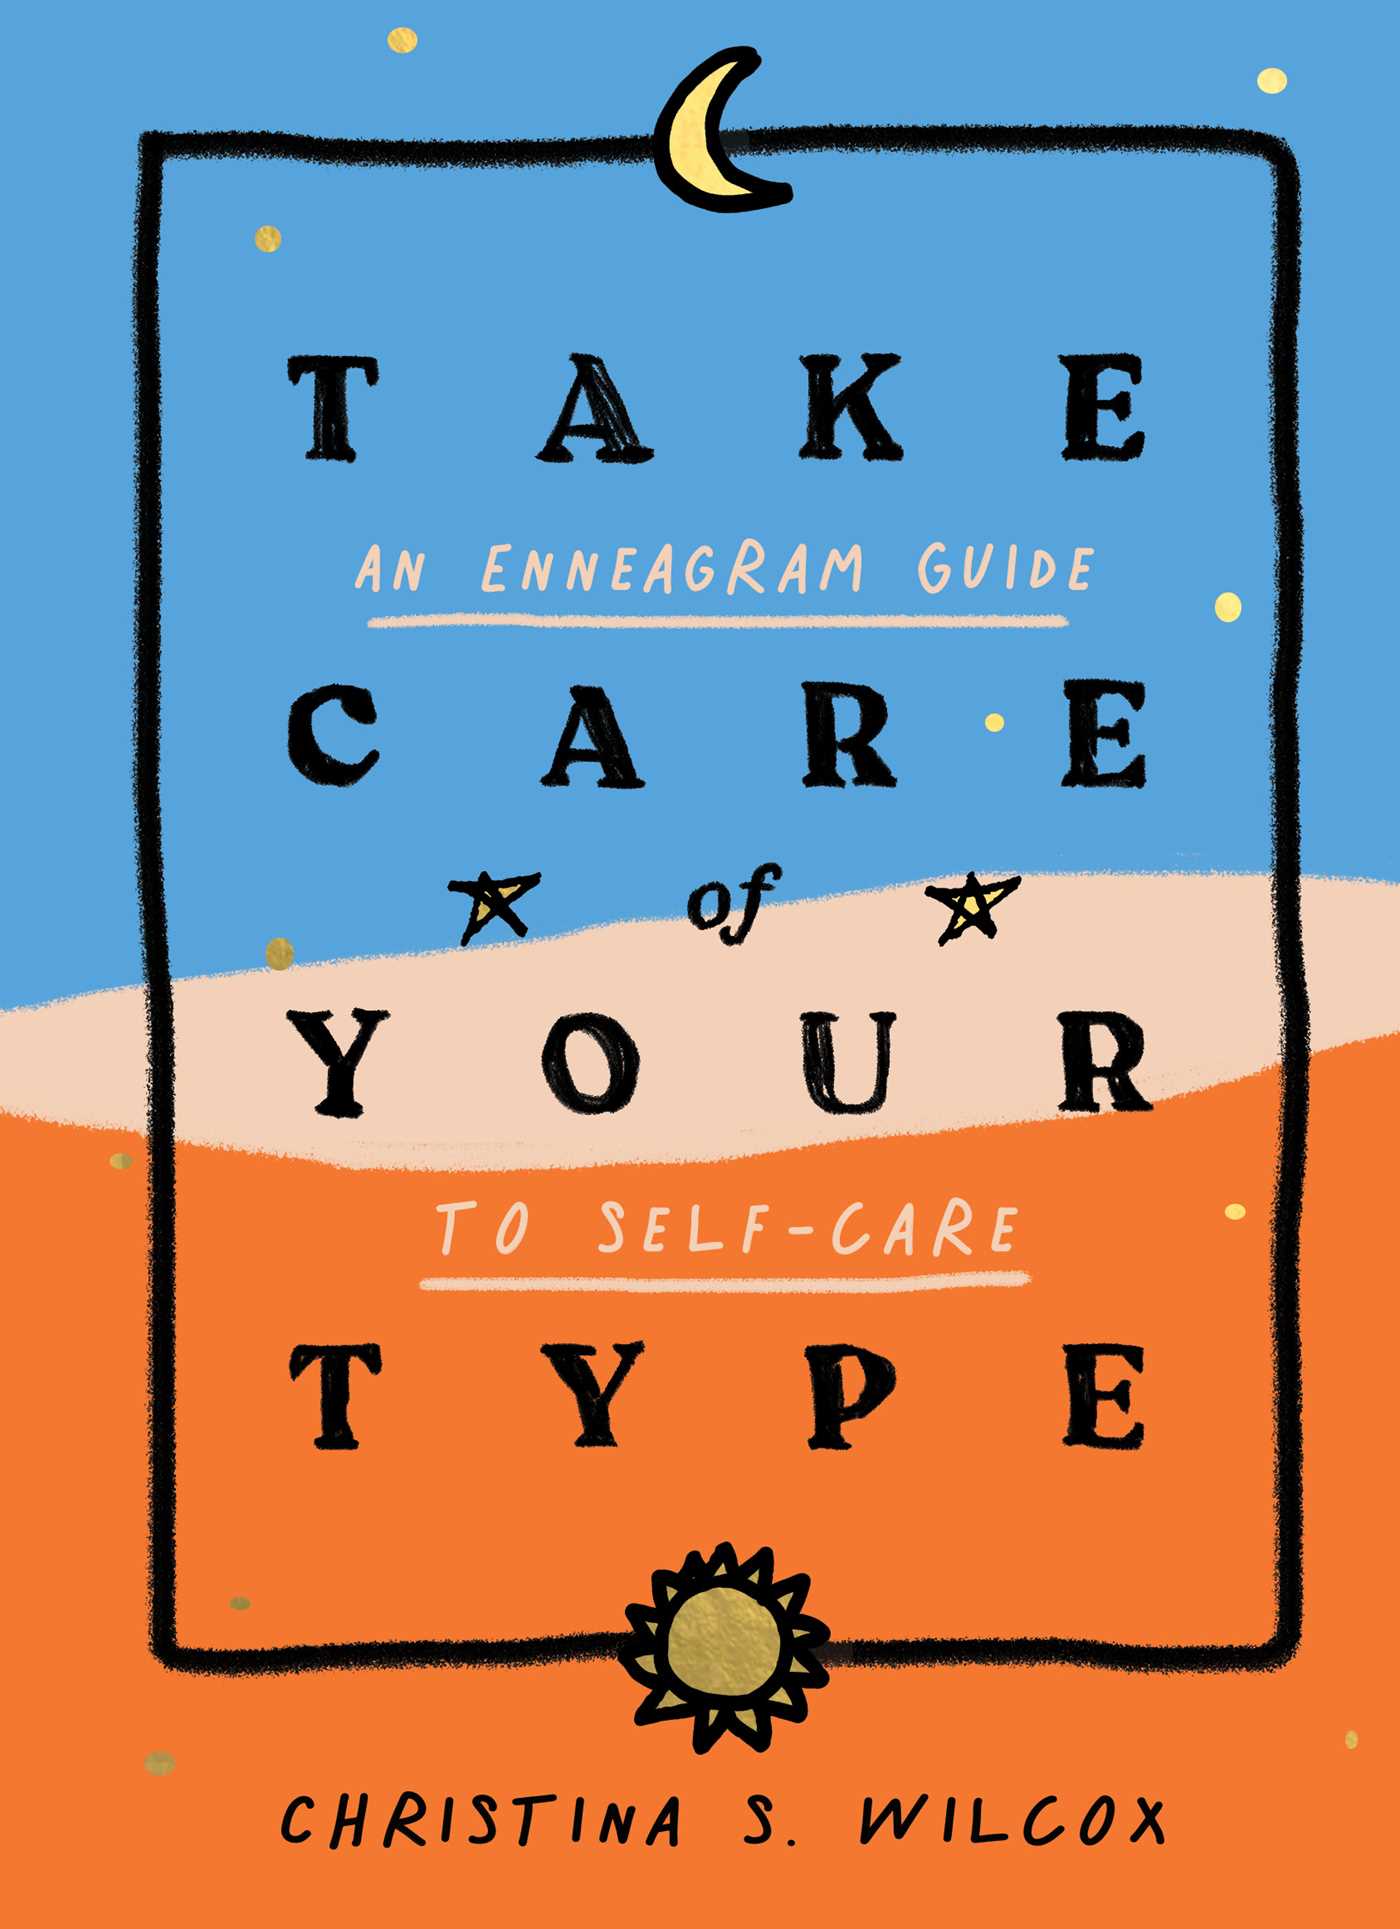 Image for "Take Care of Your Type"